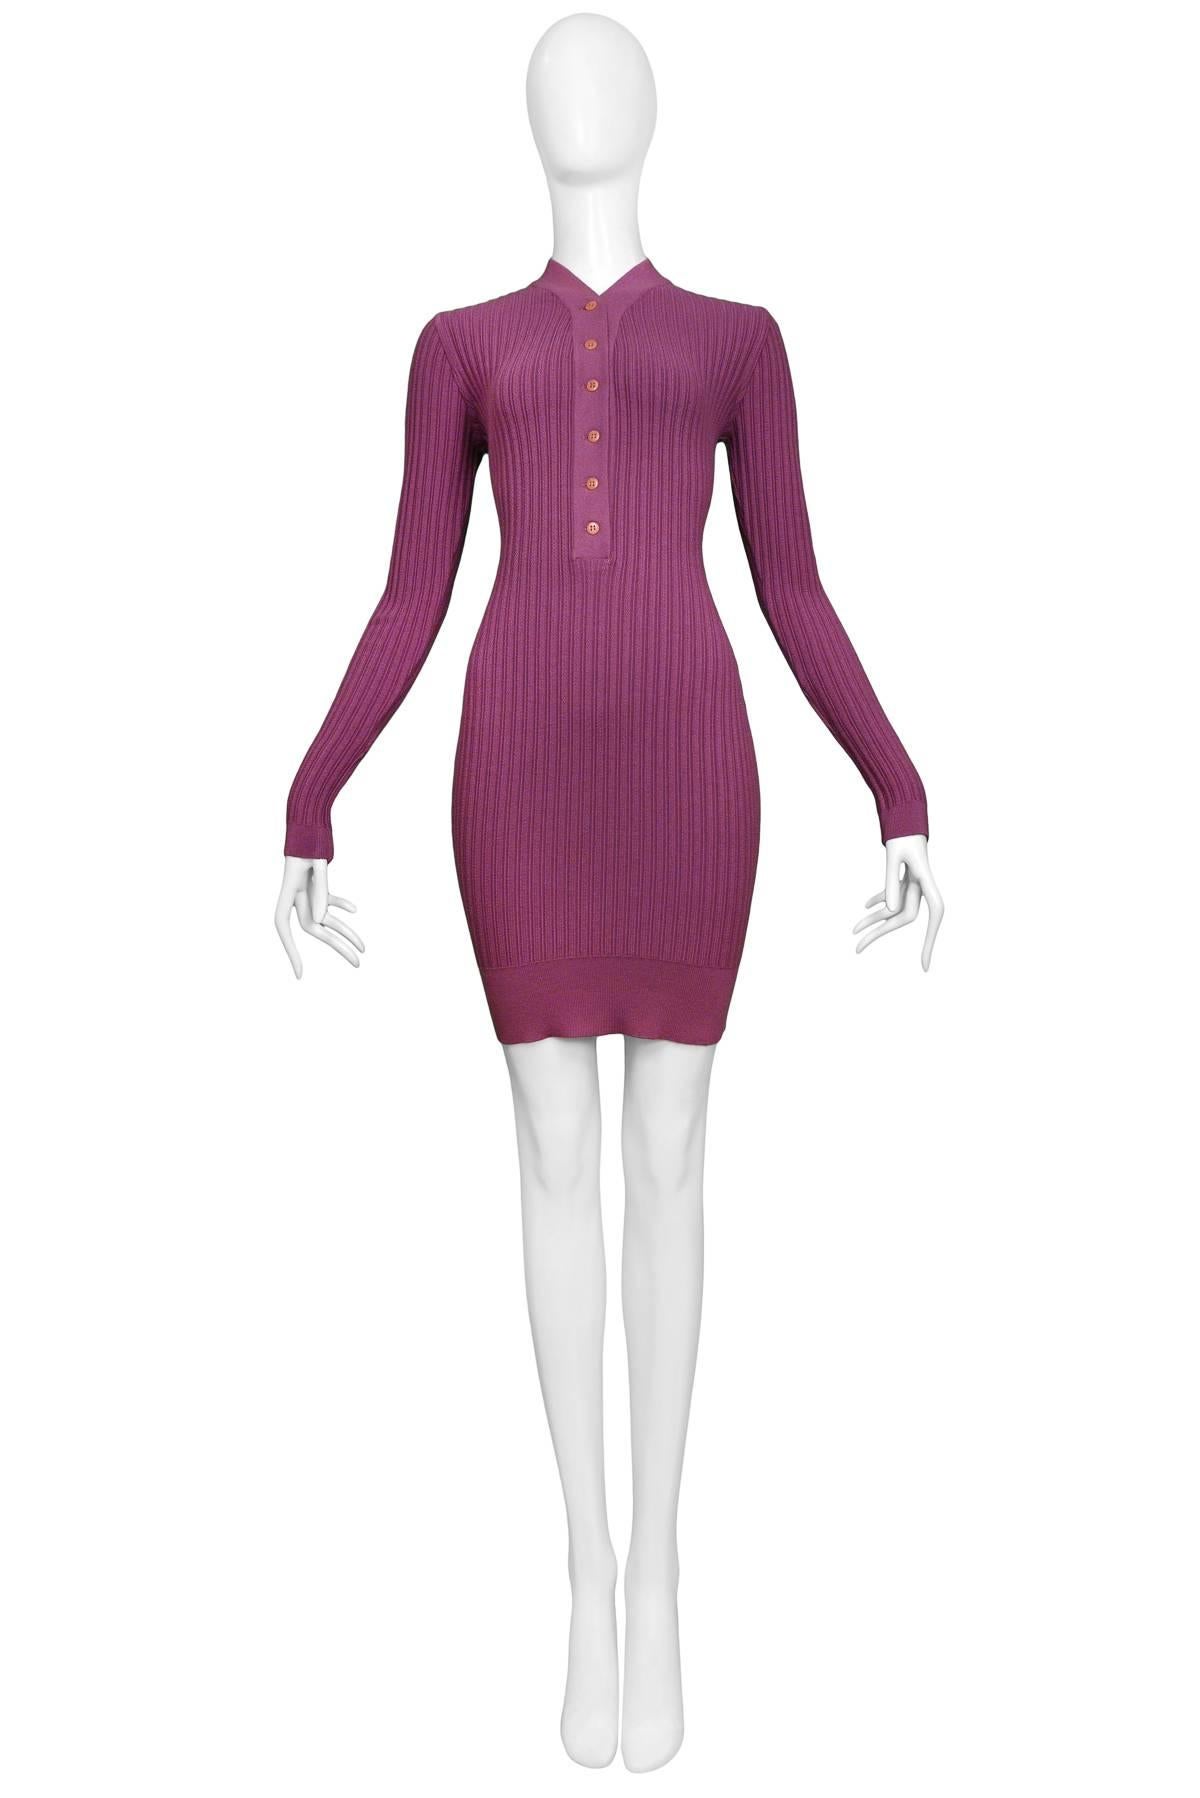 Vintage 1990's Azzedine Alaia magenta cardigan front ribbed knit body-con dress. Never worn with original tags. Circa 1990.